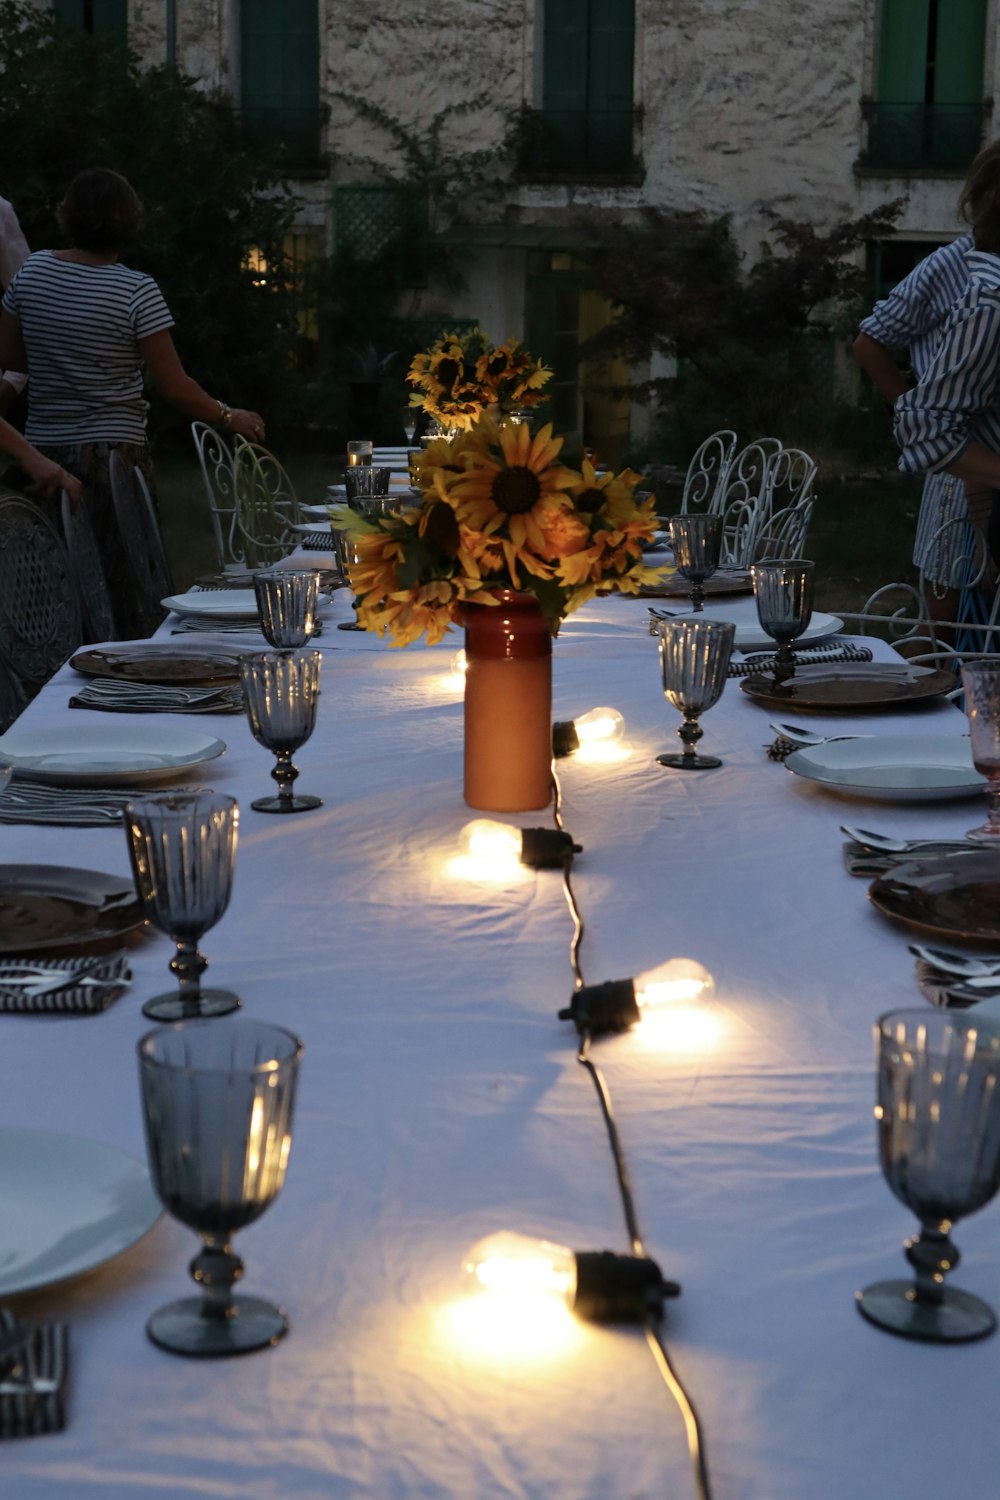 a long table with a vase of sunflowers on it